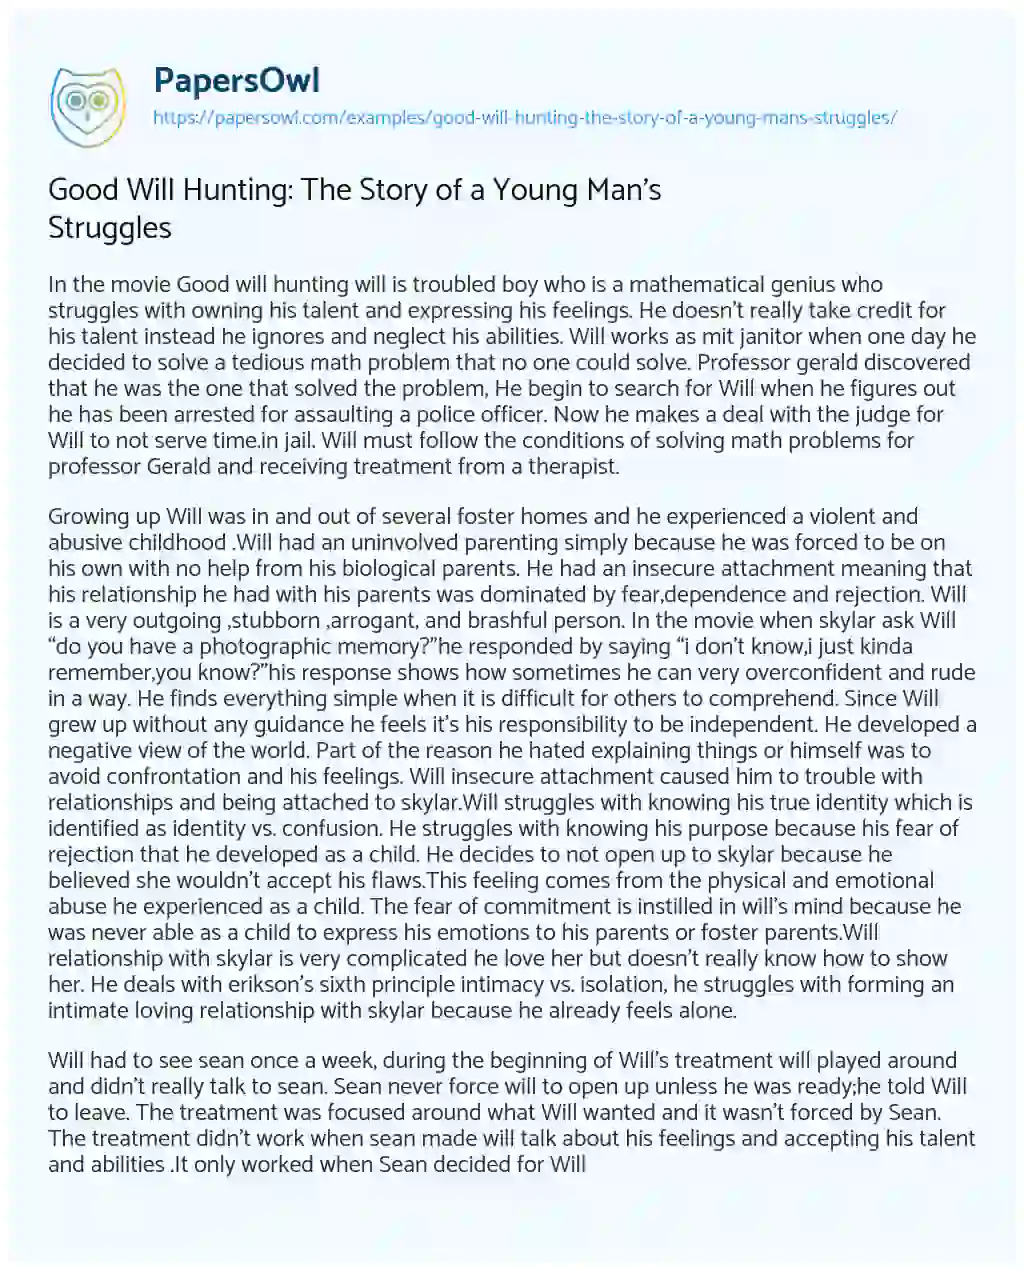 Essay on Good Will Hunting: the Story of a Young Man’s Struggles